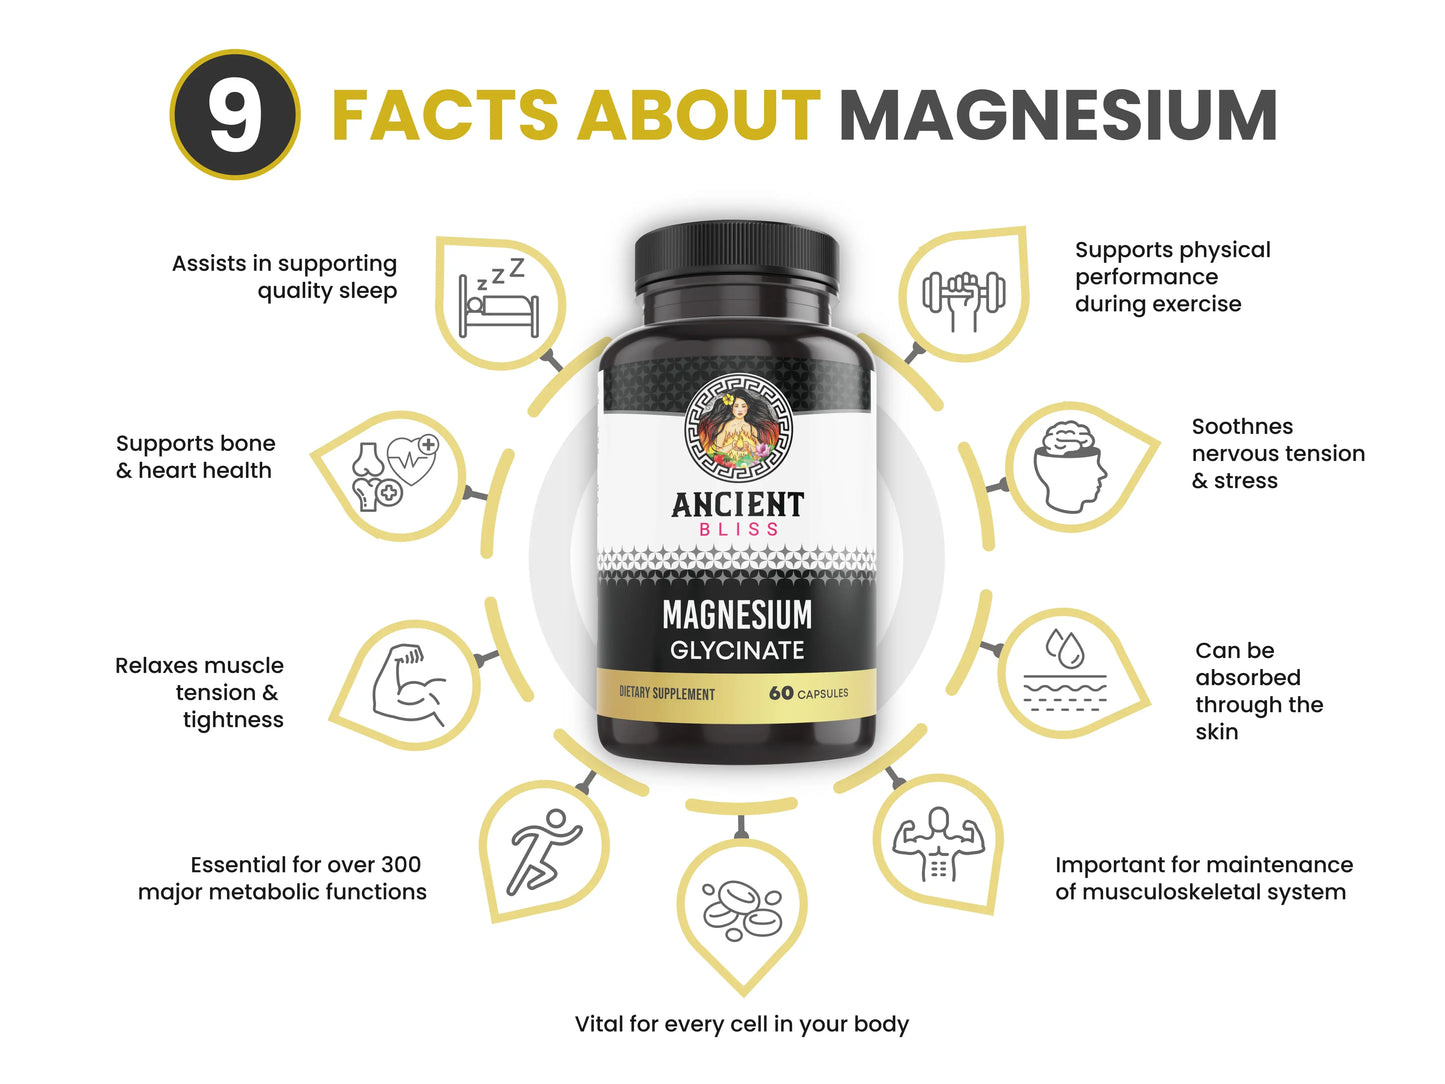 Ancient Bliss Magnesium Glycinate 500mg 60 Caps with Black Pepper